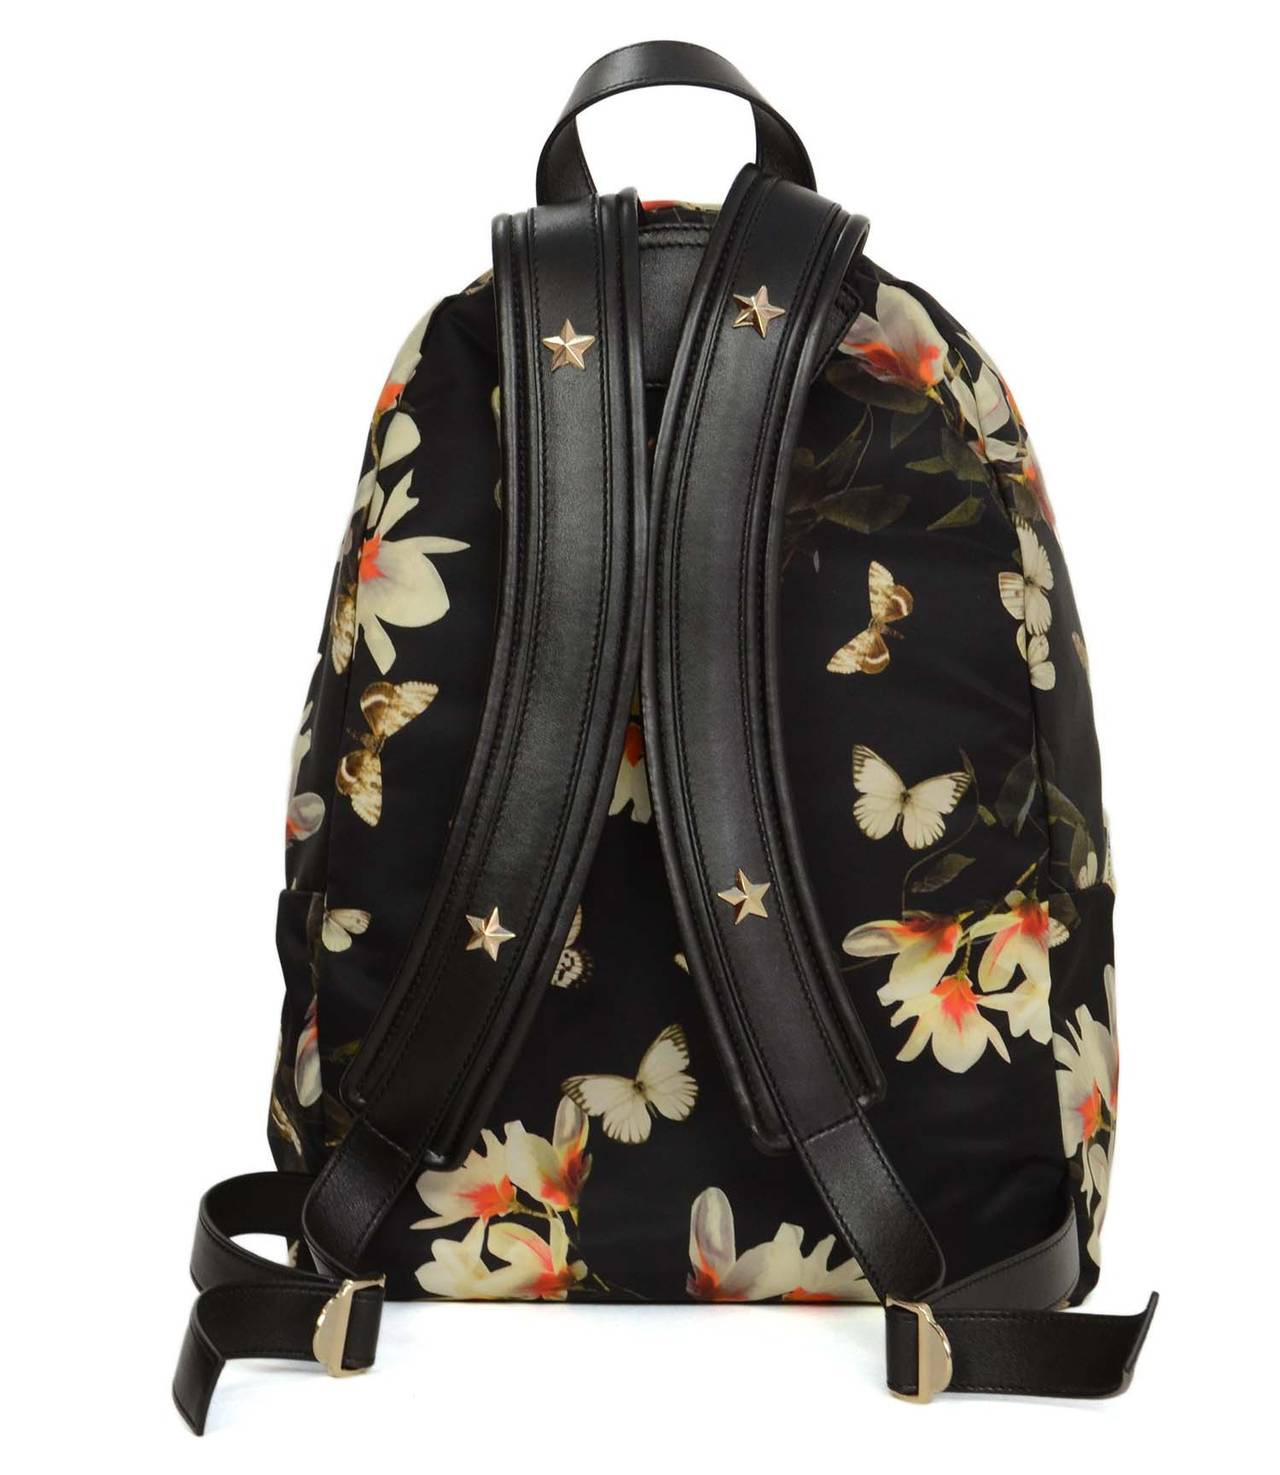 Bleed in Colors, Givenchy floral print backpack // purchase here